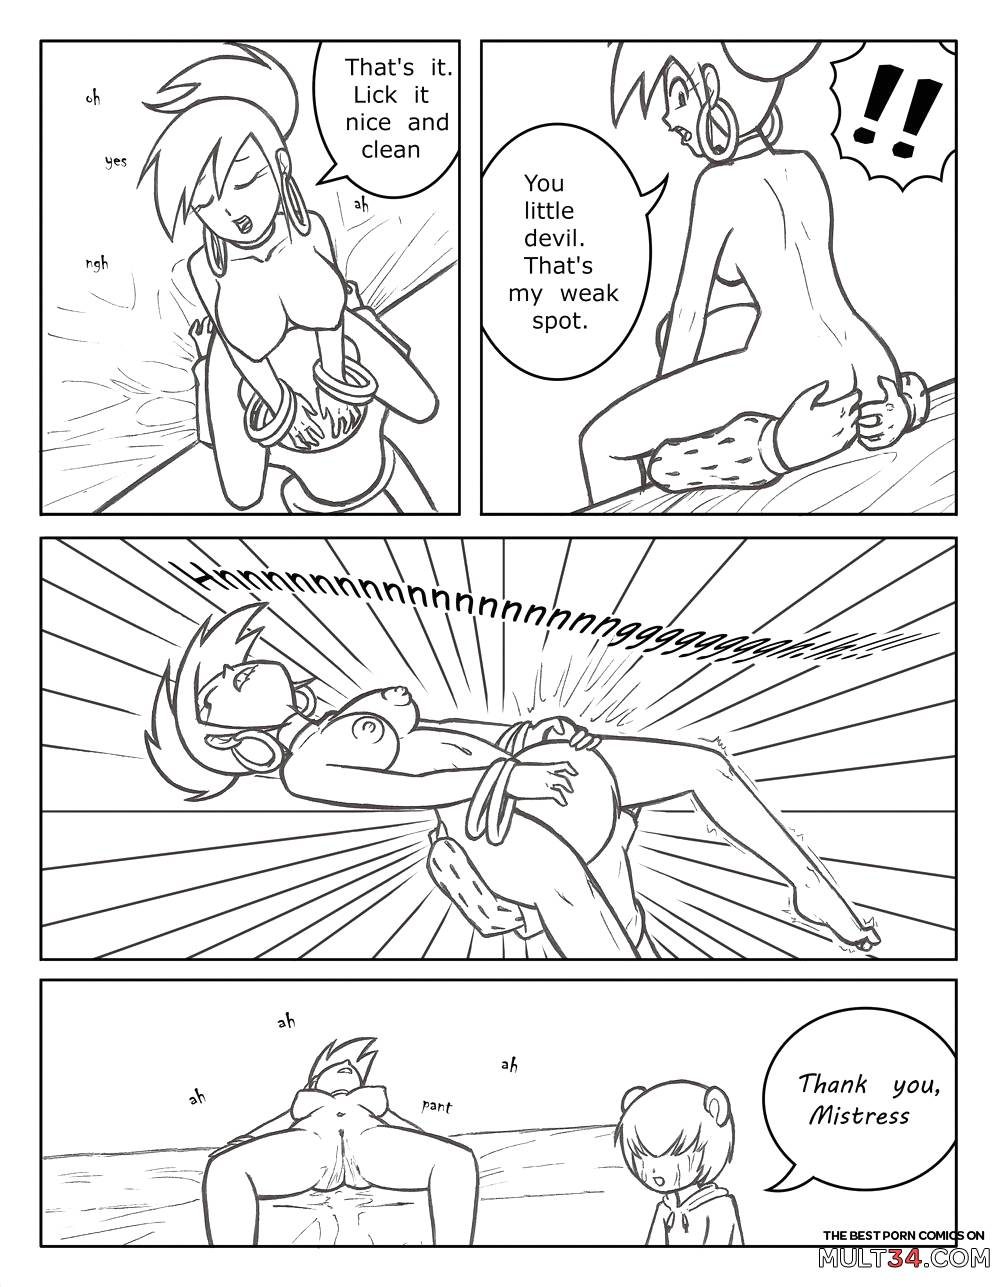 Imaginary lover page 7